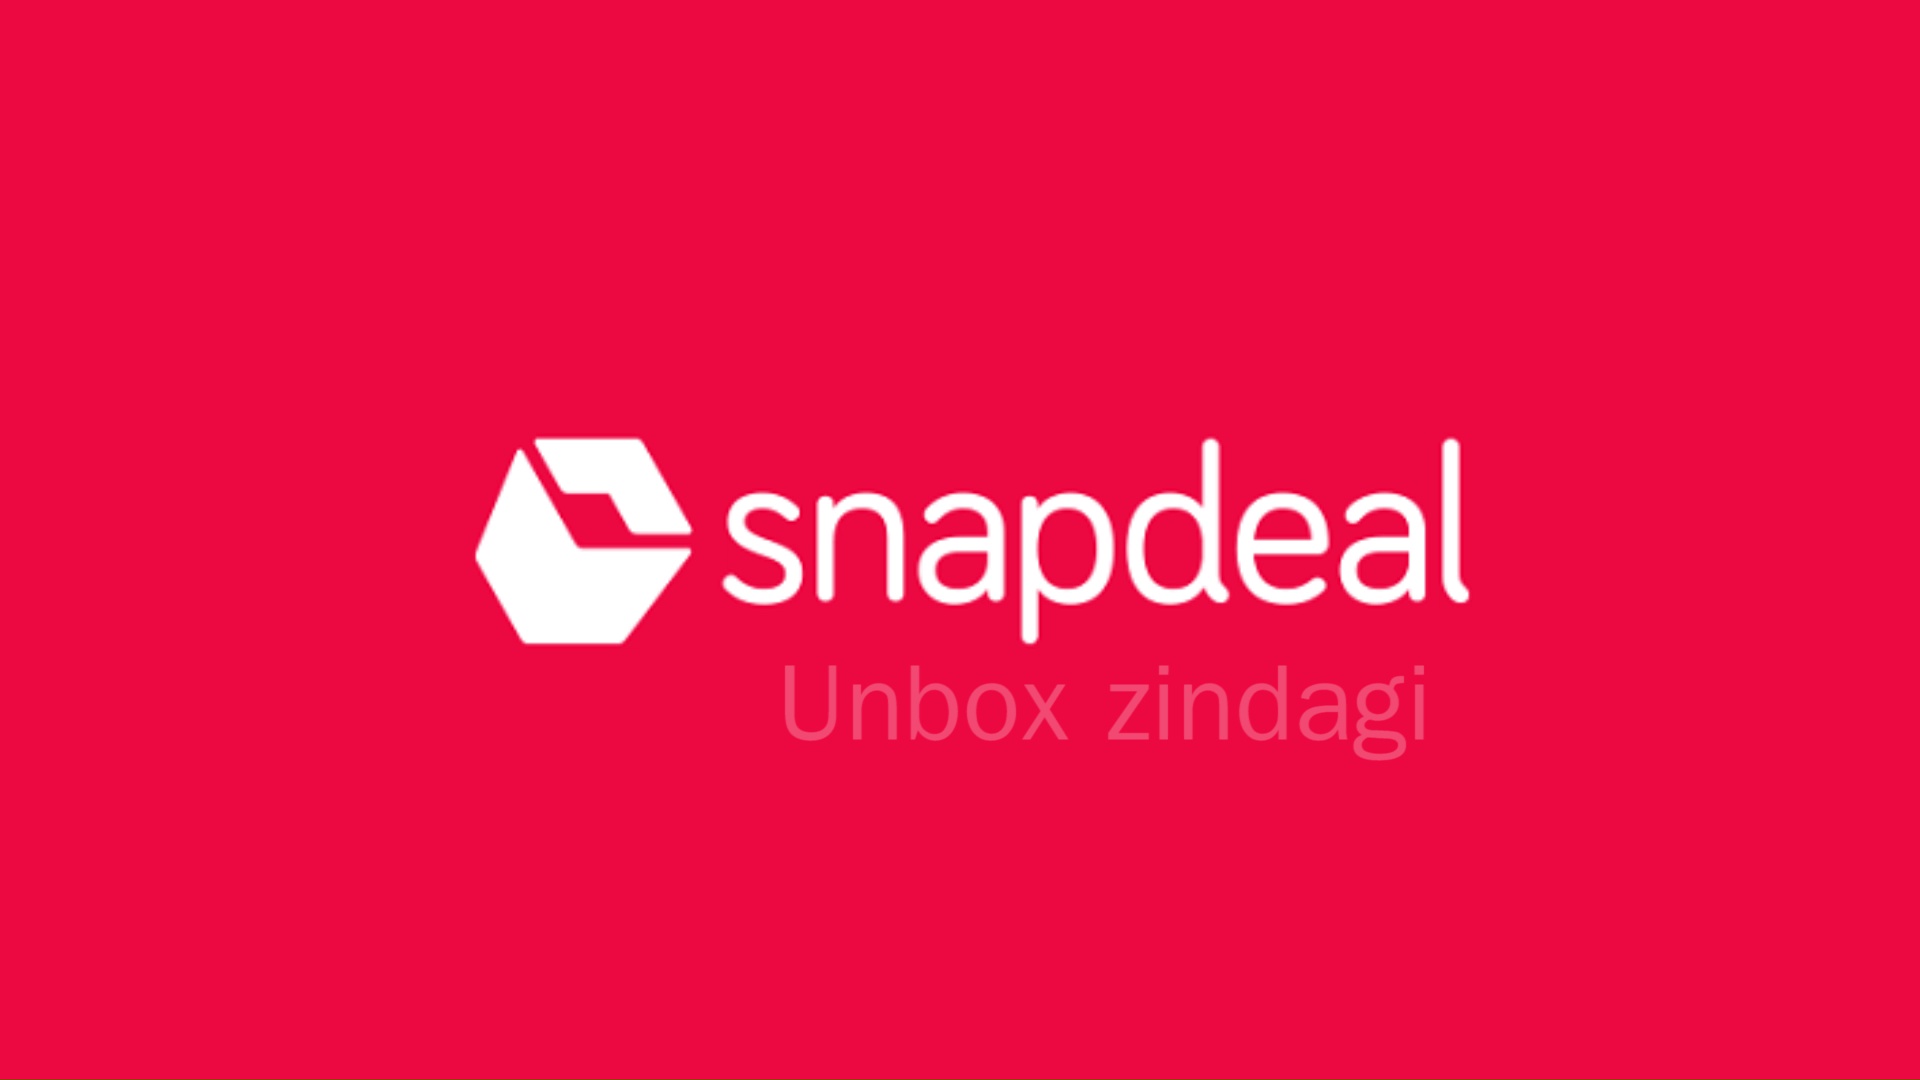 Thumb 4 - Snapdeal Jpg , HD Wallpaper & Backgrounds